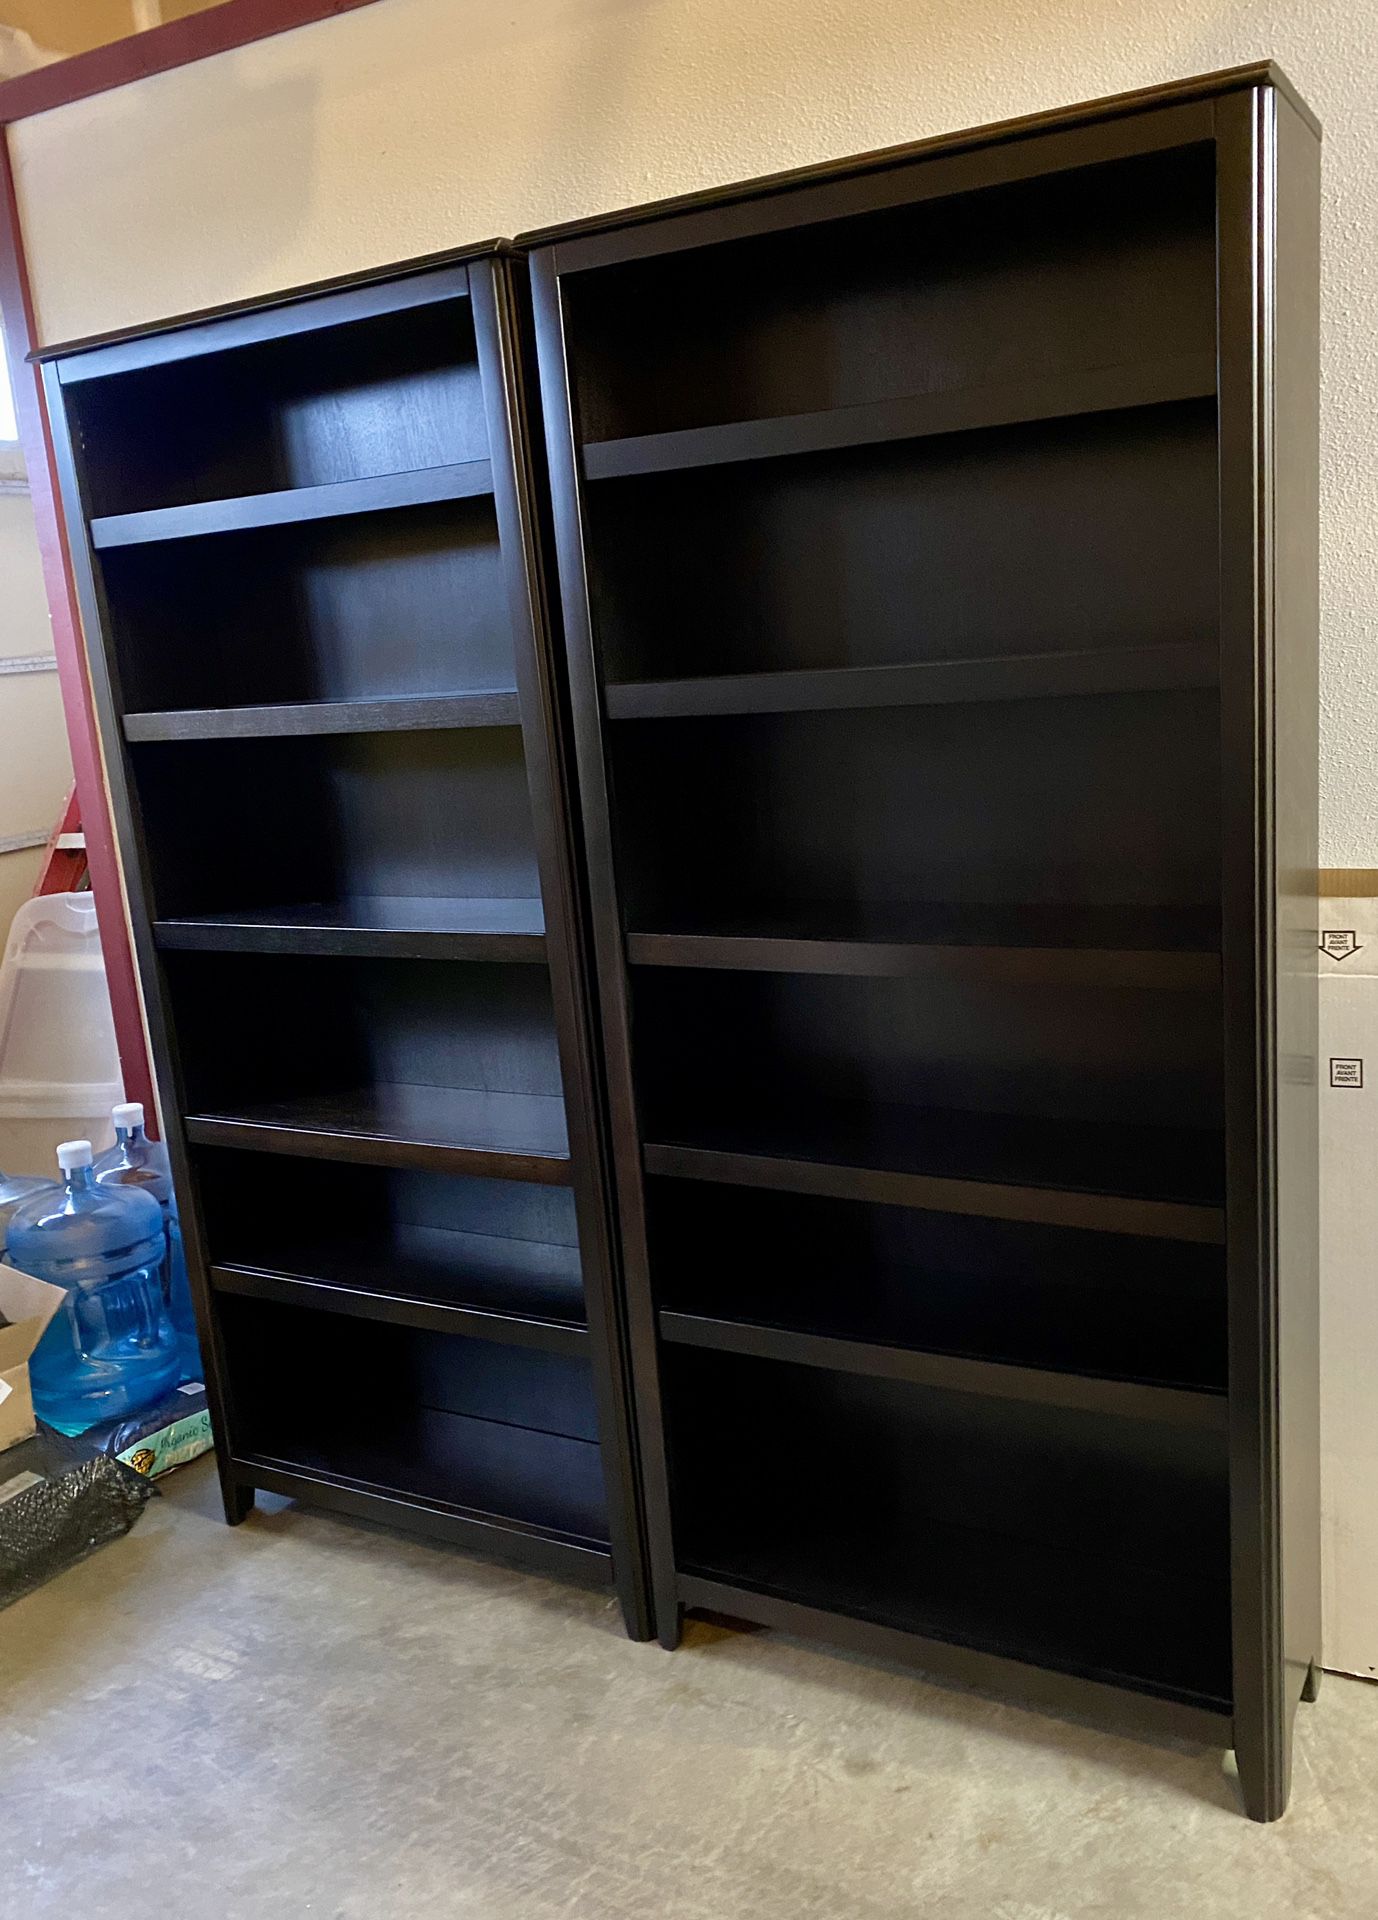 Two nice bookshelves almost black color (75 in tall)